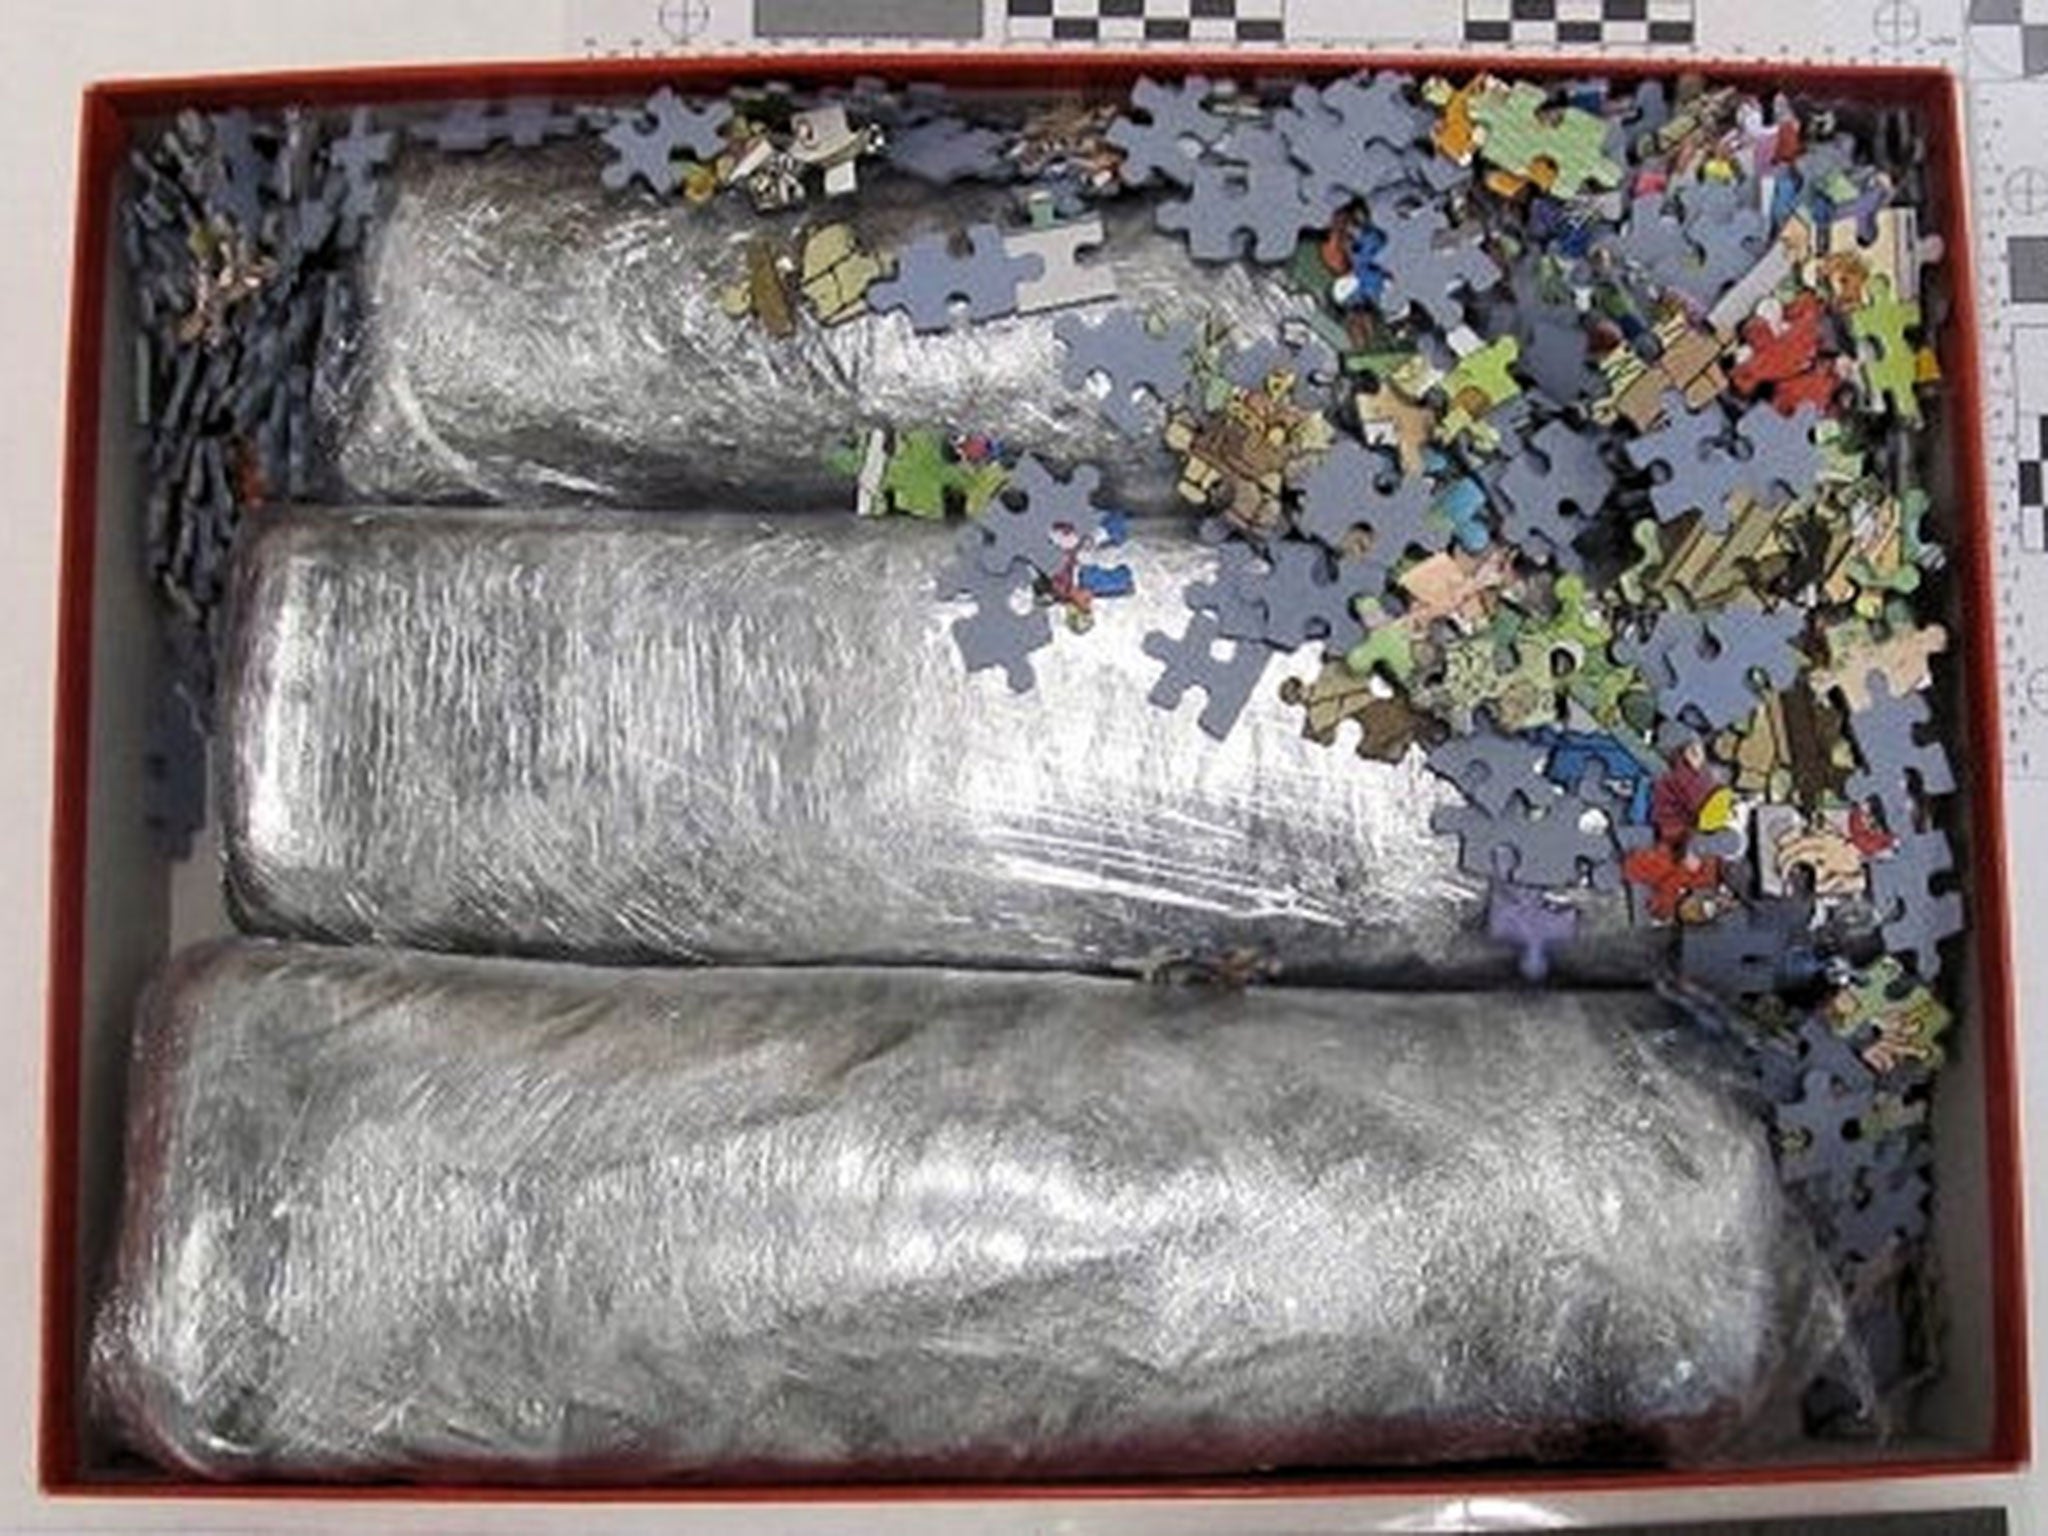 The smugglers hid £5million of cocaine inside children's presents